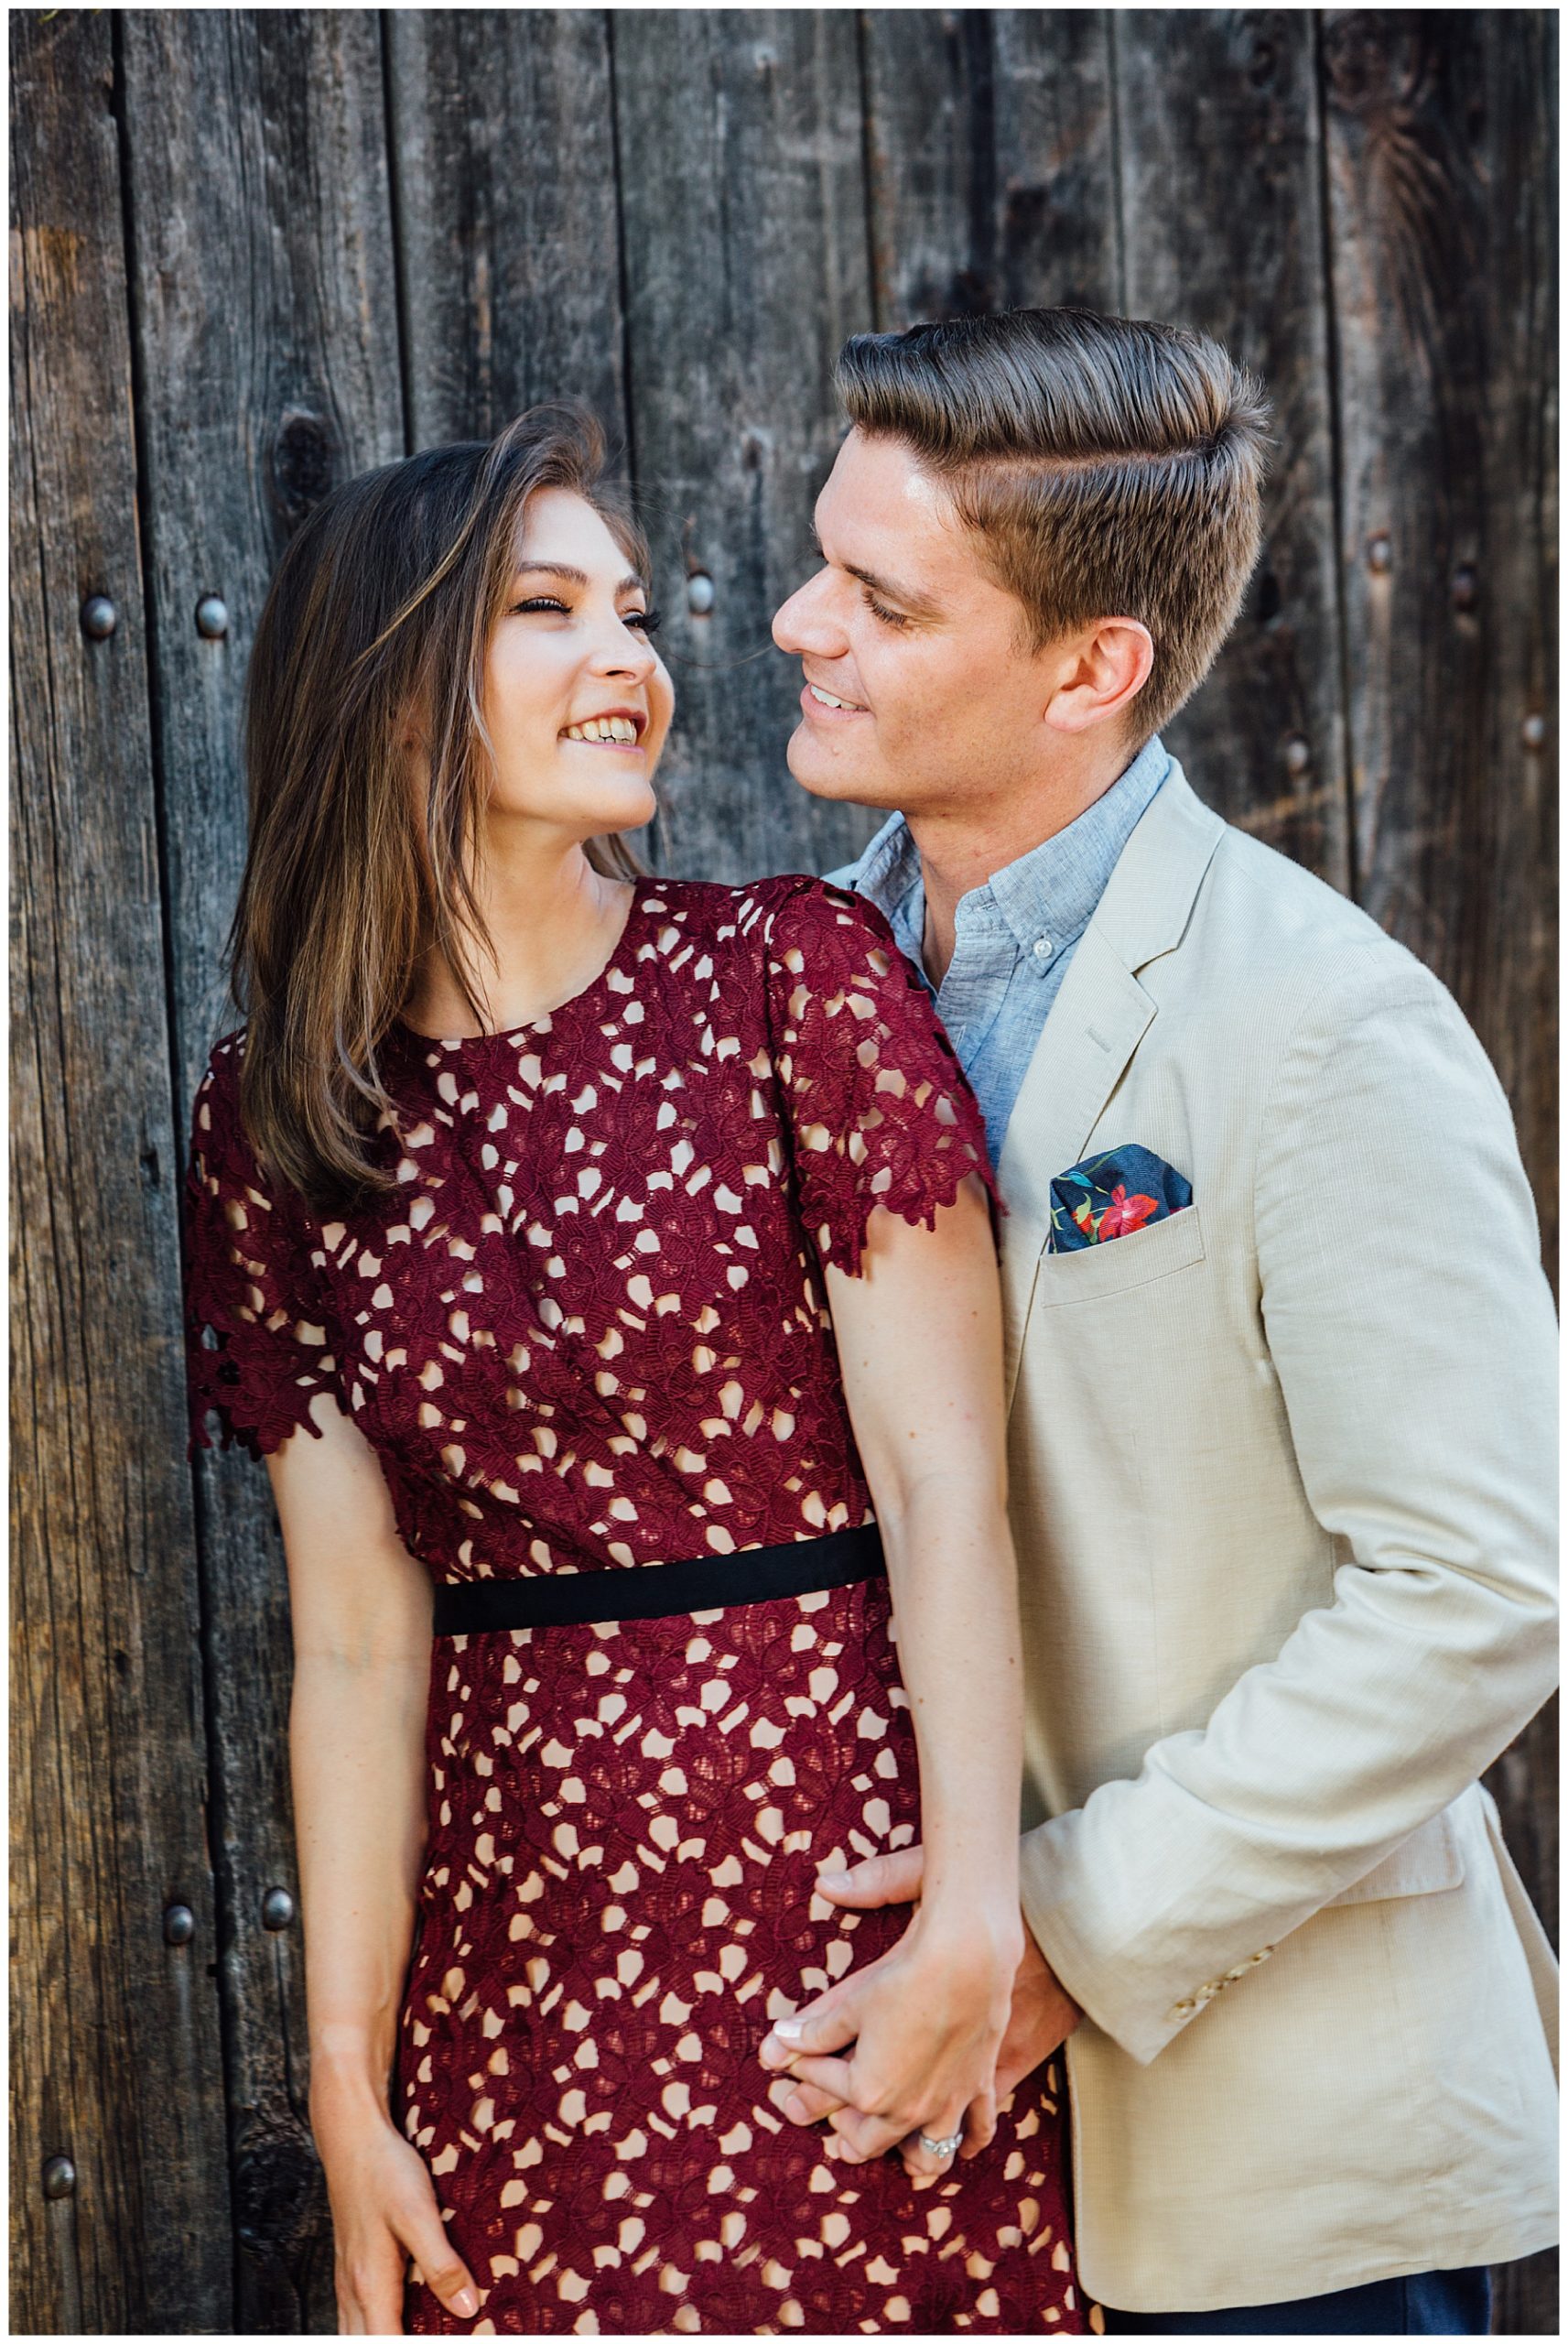 Engagement Photos with wood background